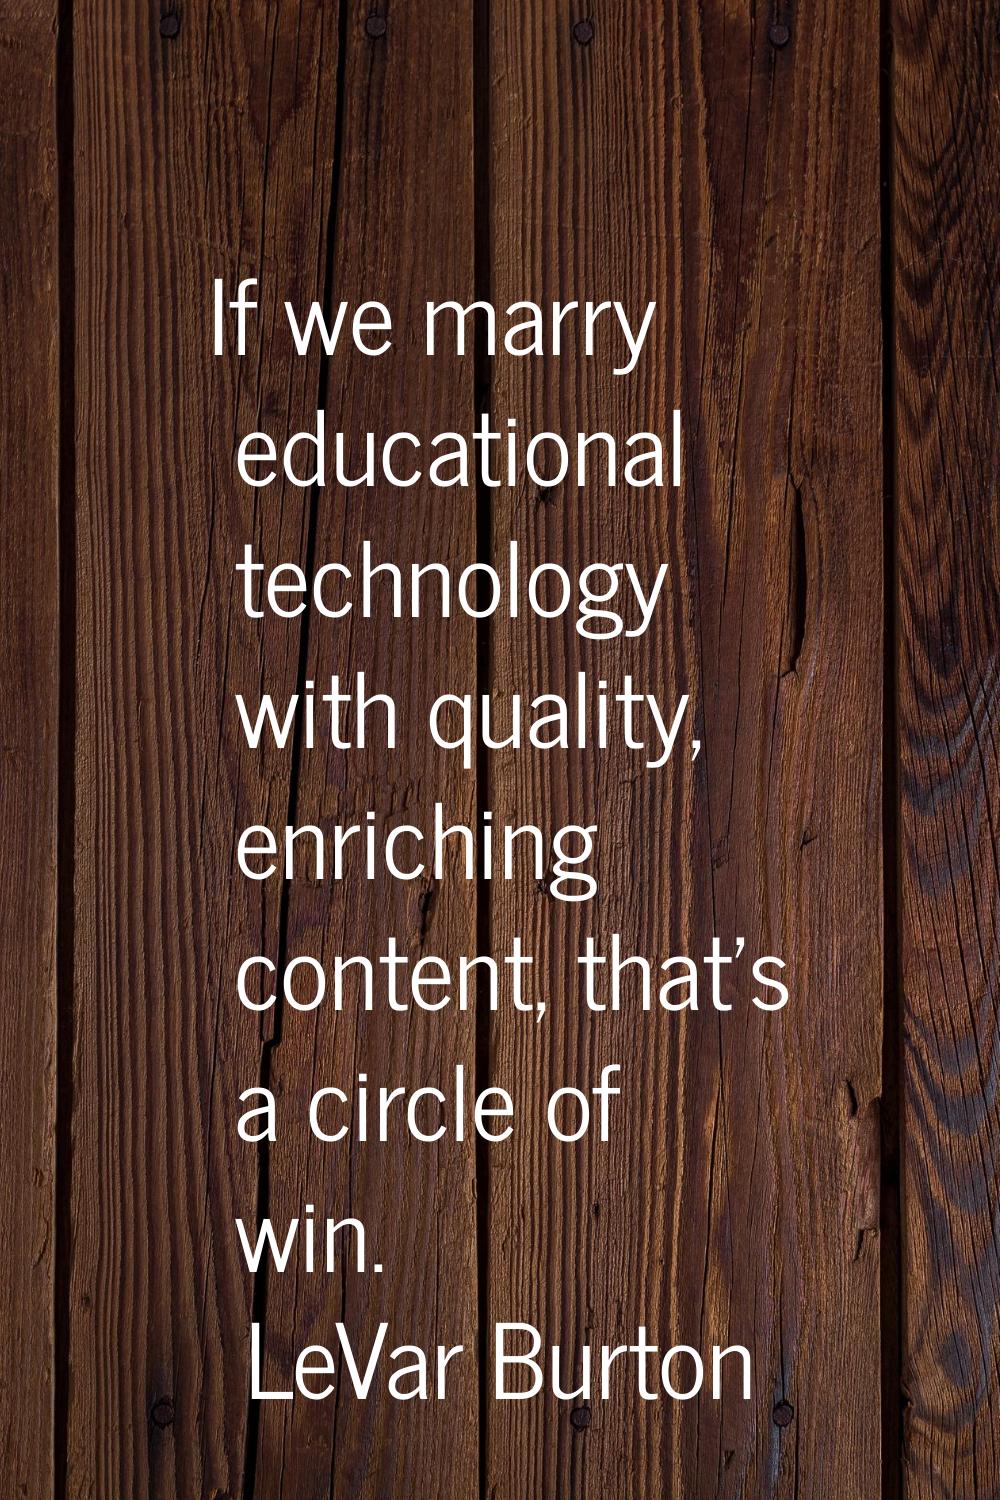 If we marry educational technology with quality, enriching content, that's a circle of win.